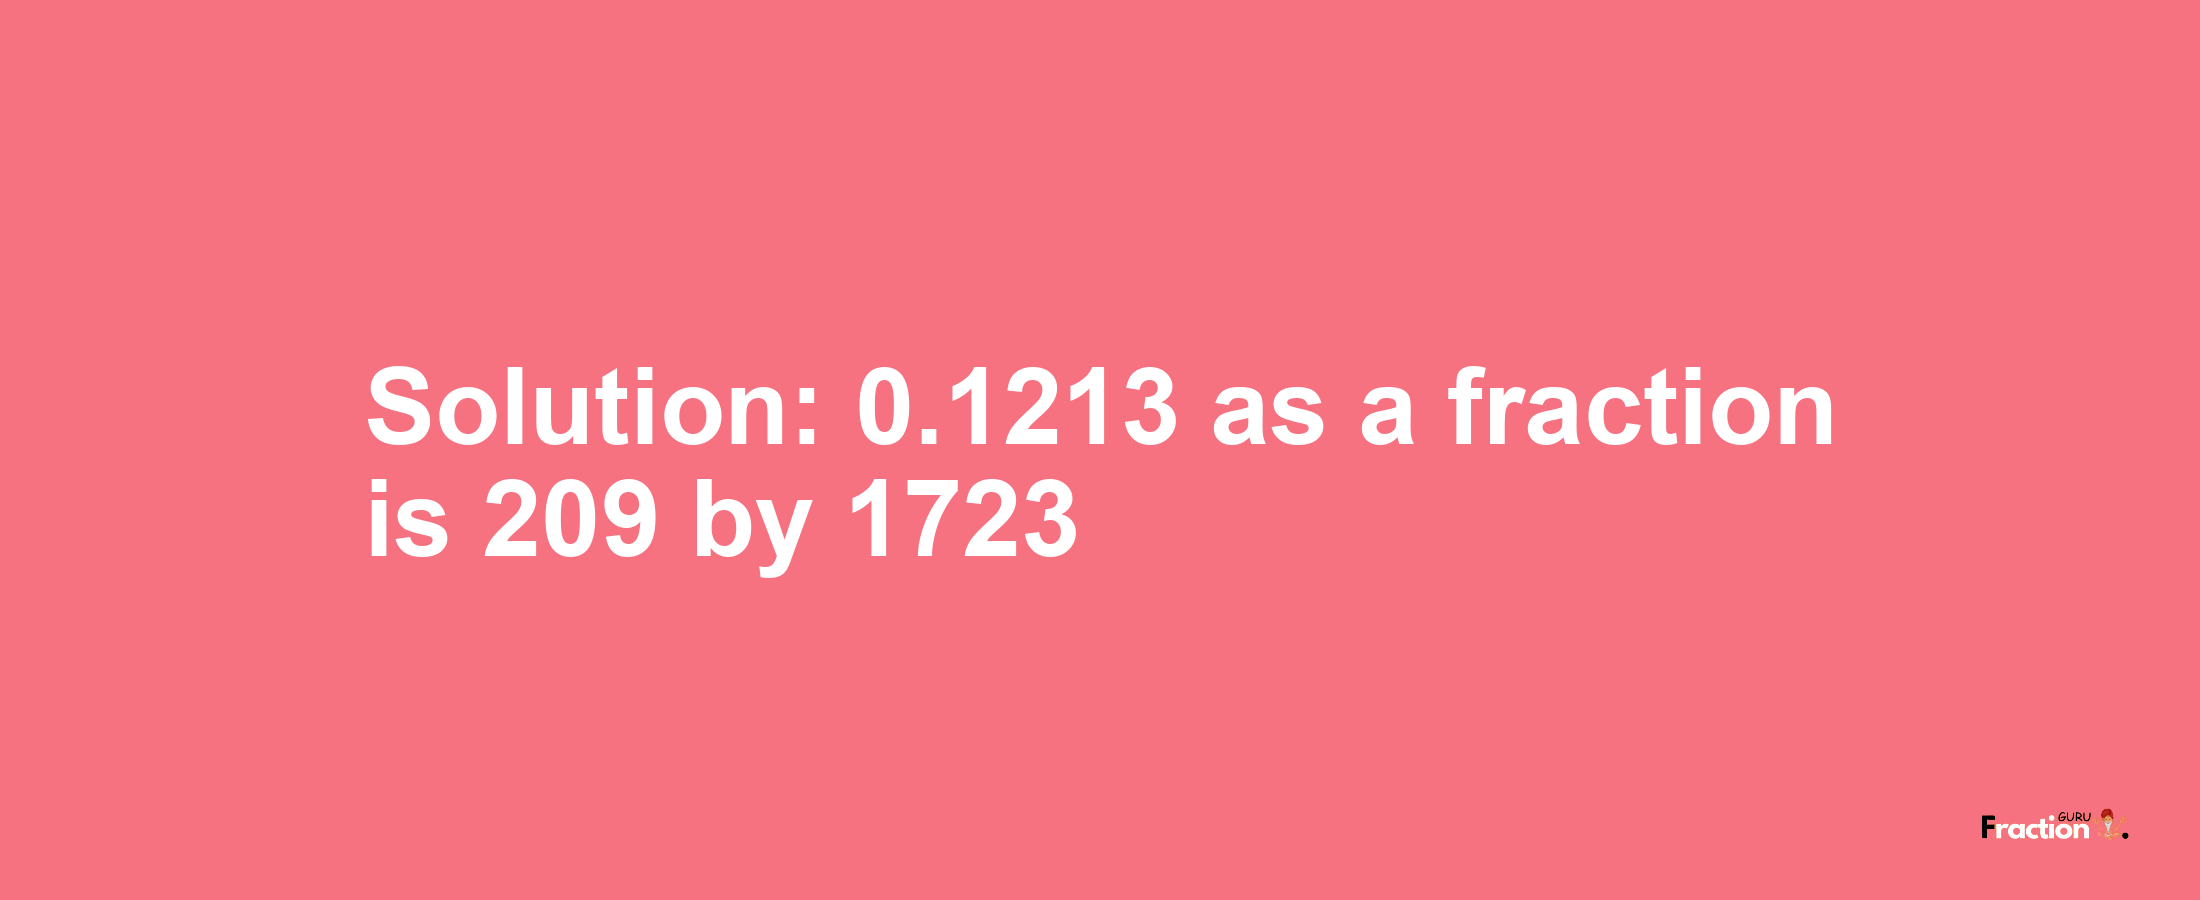 Solution:0.1213 as a fraction is 209/1723